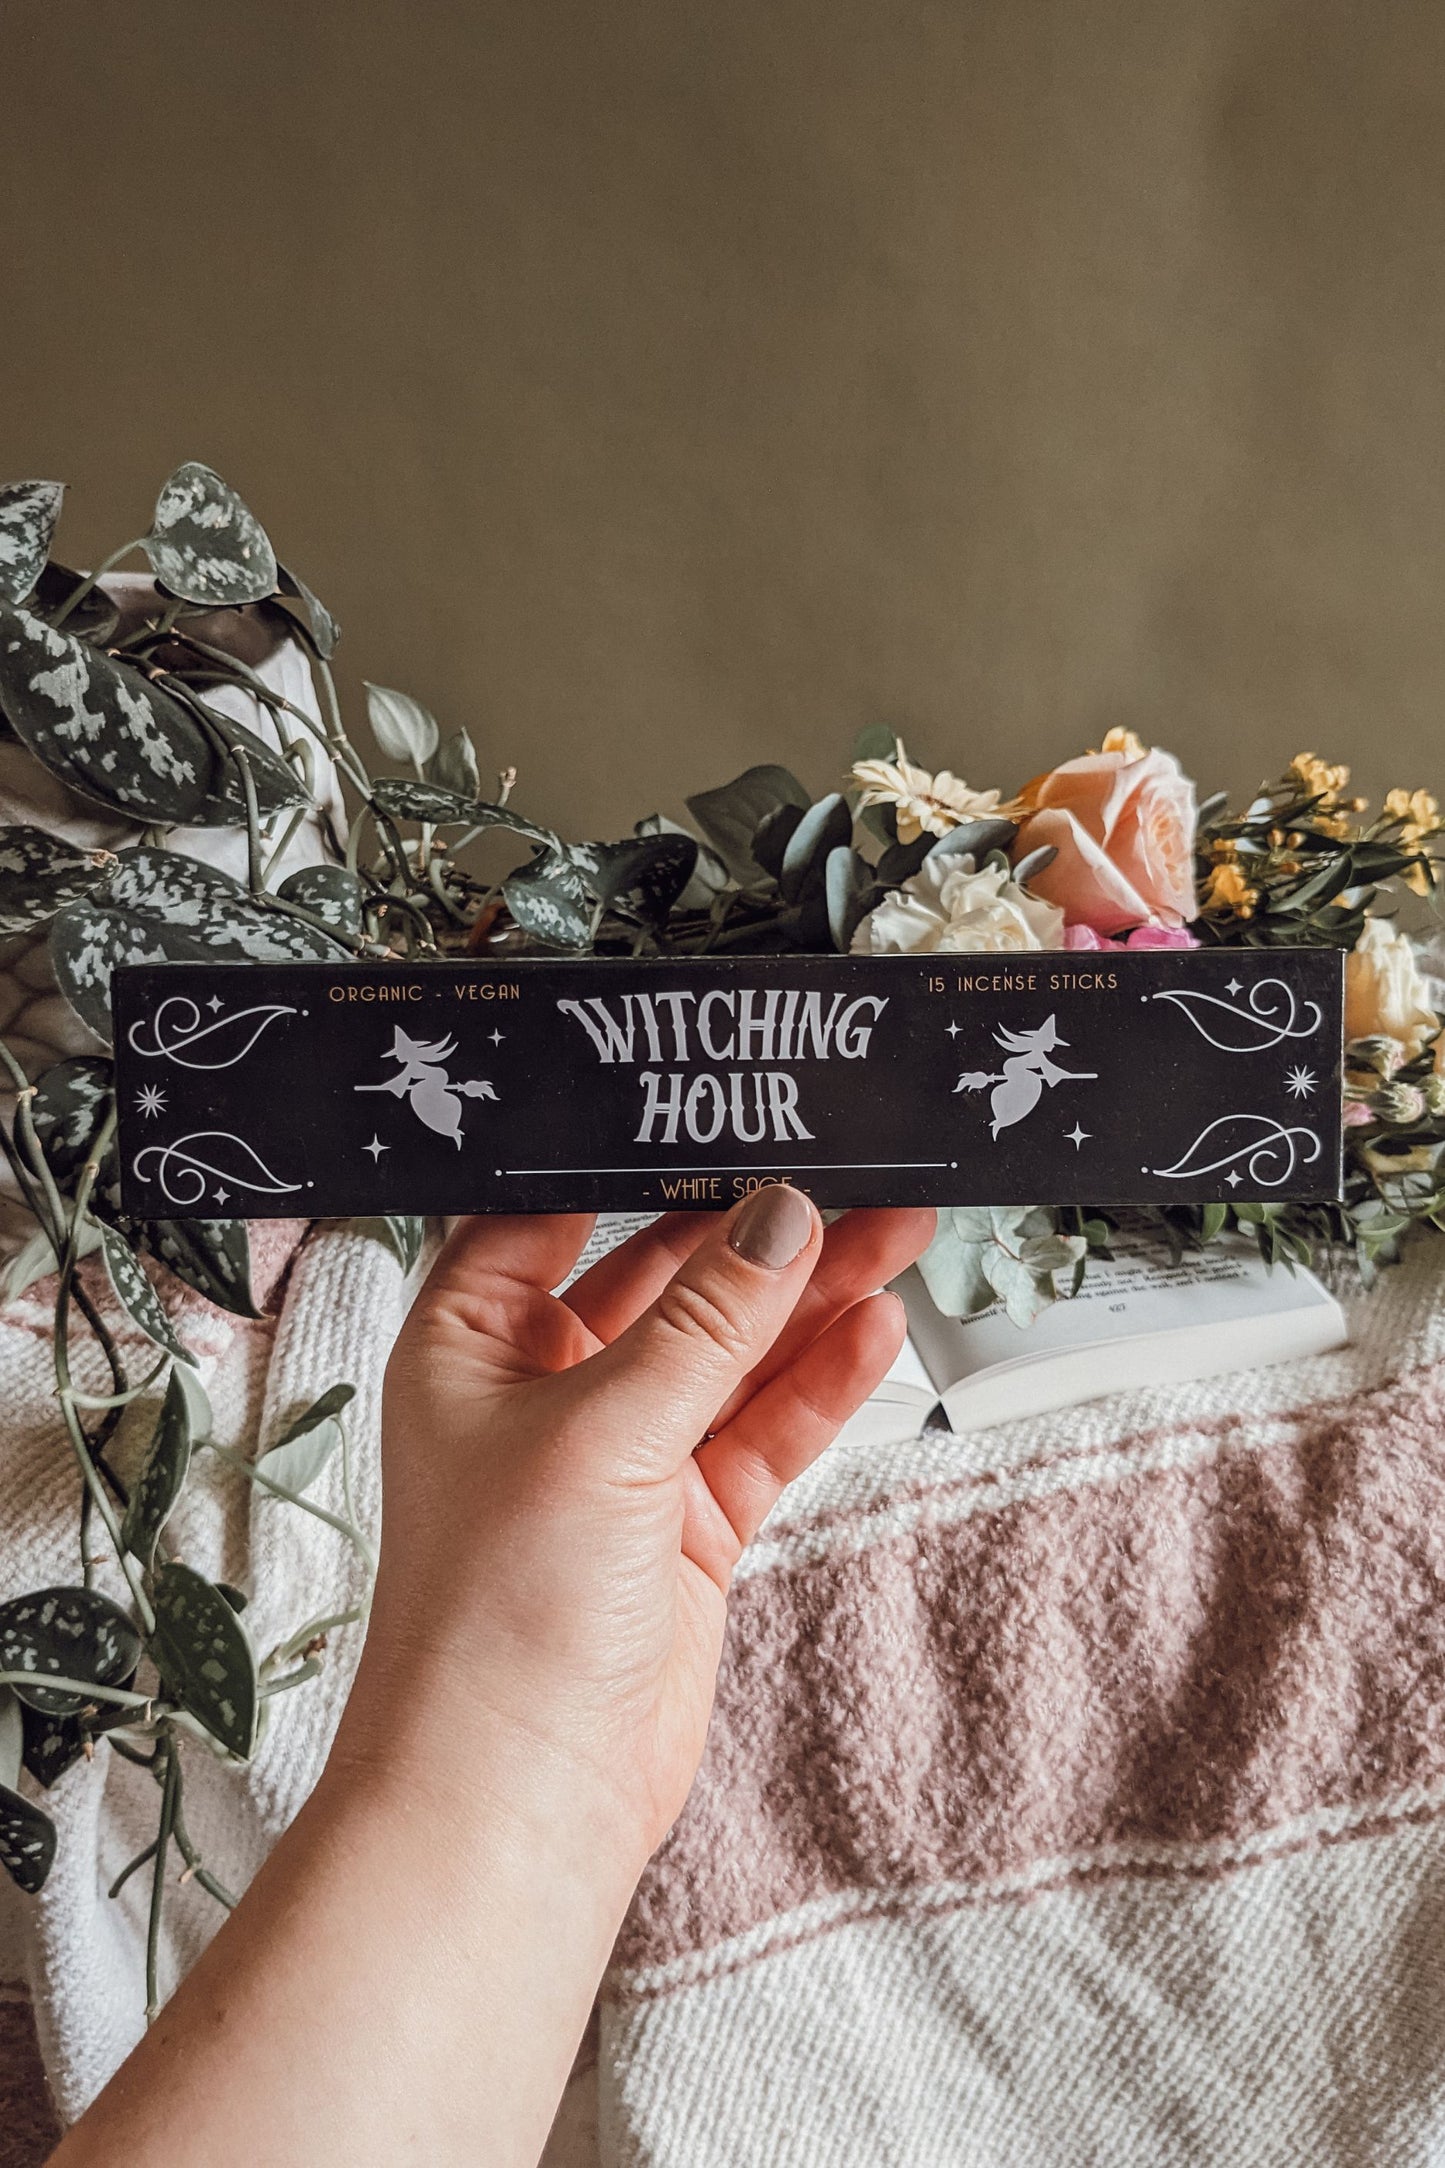 'Witching Hour' Incense Sticks